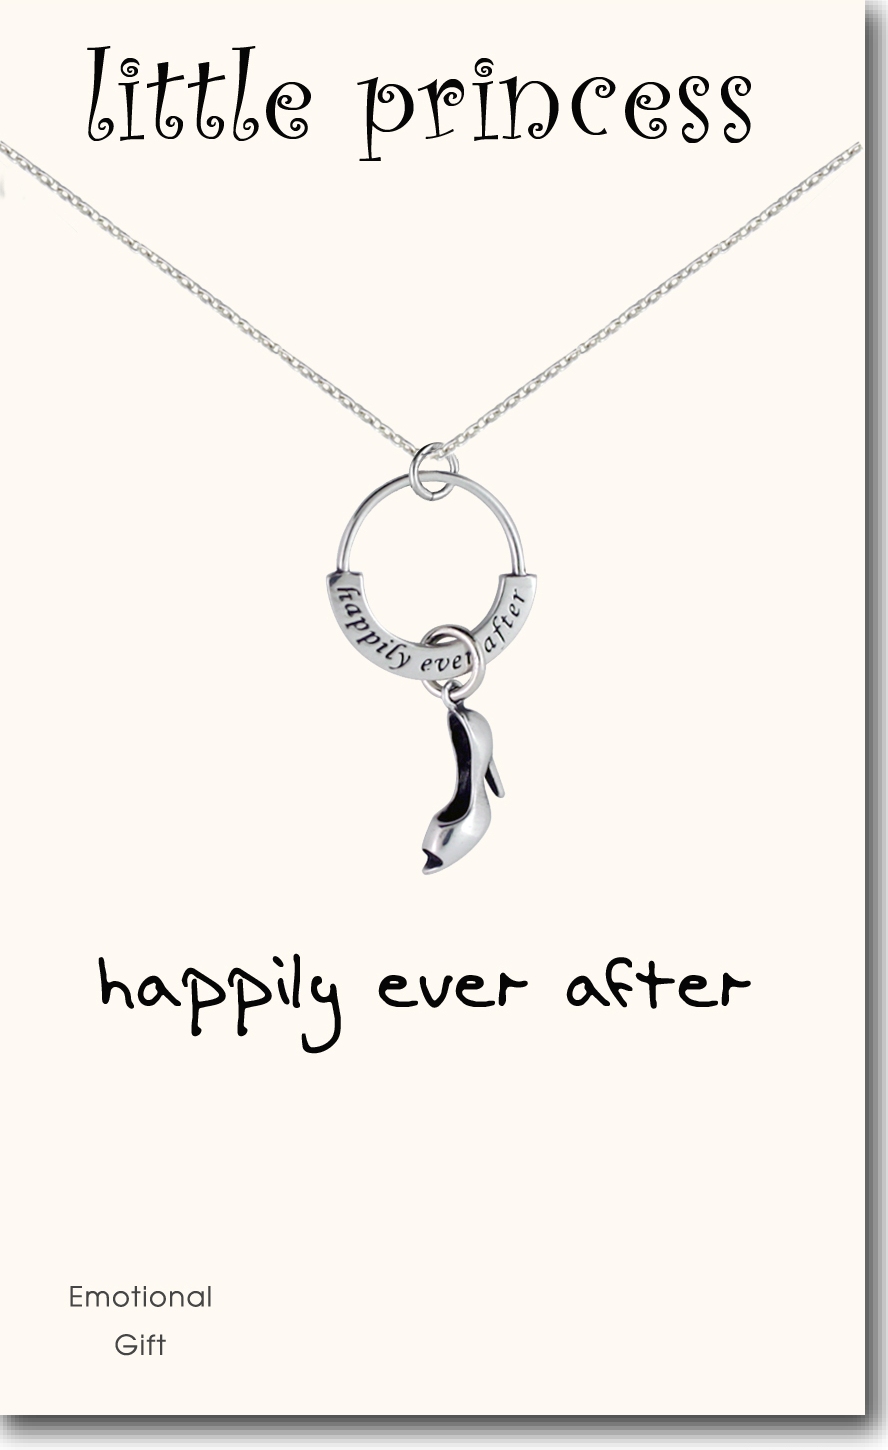 Happily ever after pendant necklace